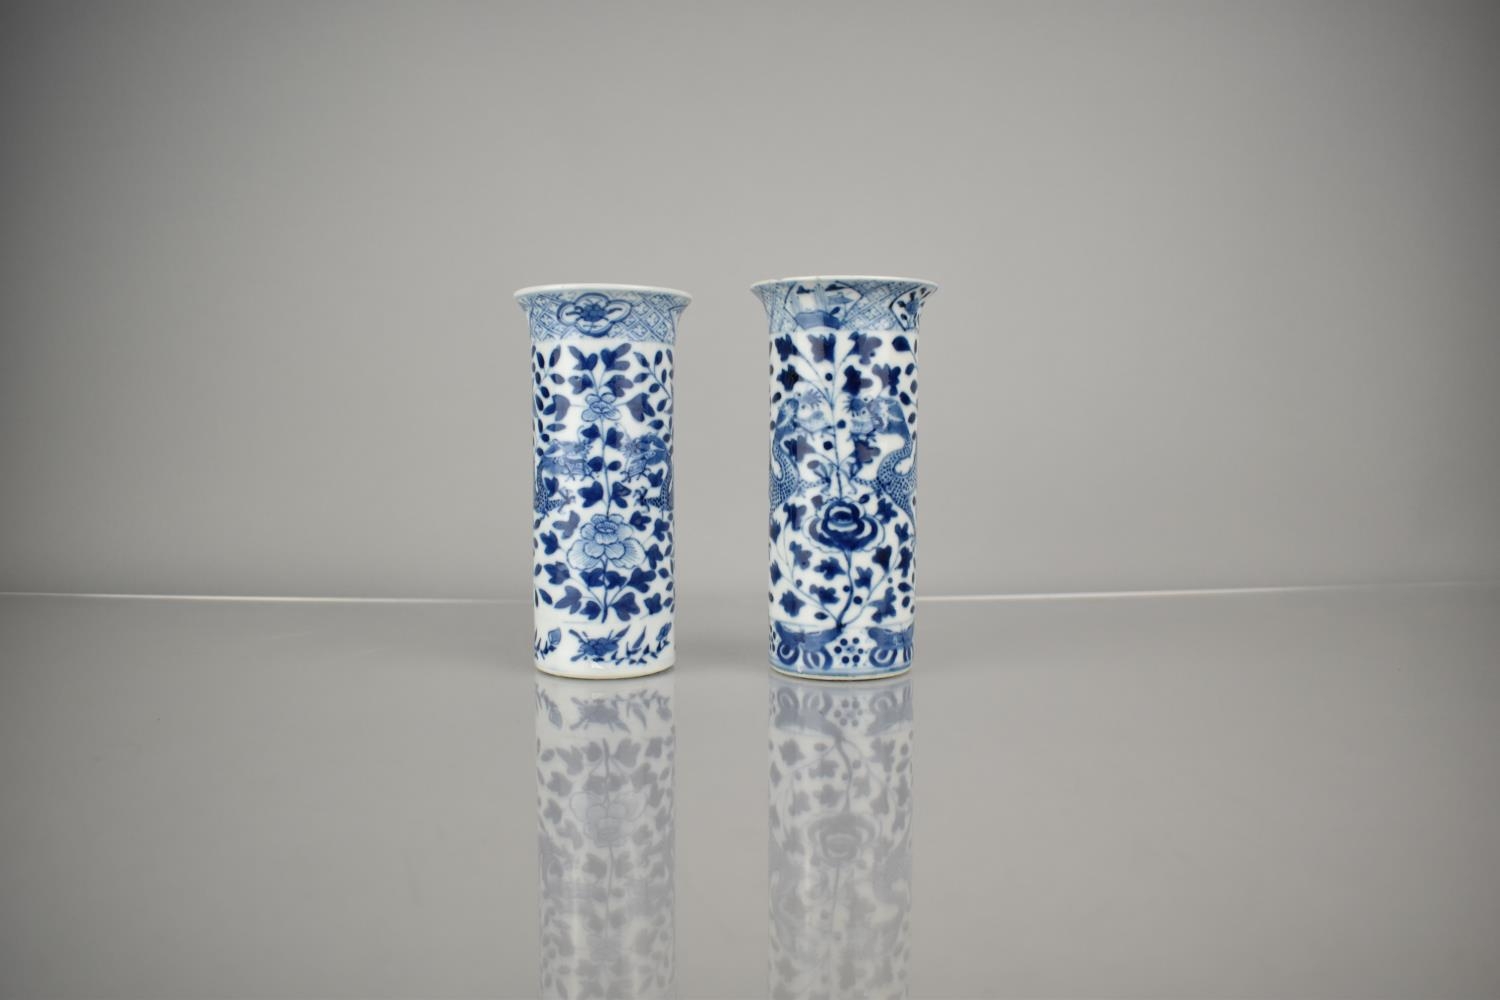 A Near Pair of 19th/20th Century Chinese Porcelain Sleeve Vases Decorated with Dragons Amongst - Image 3 of 5